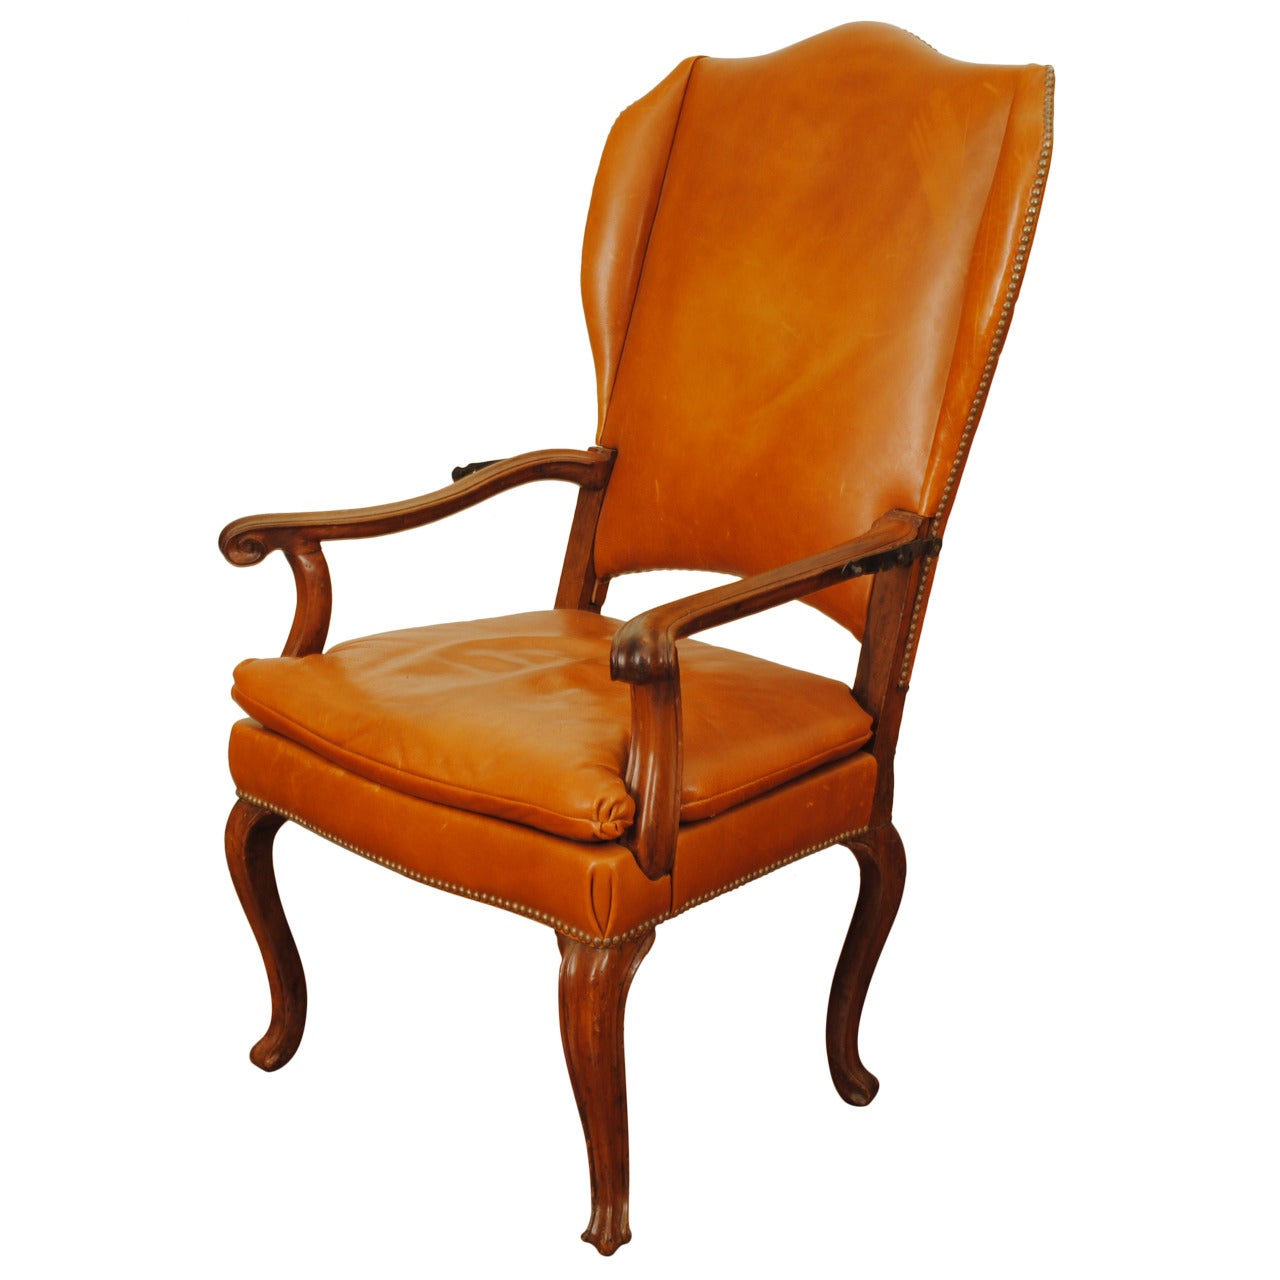 Italian Rococo Walnut and Leather Upholstered Reclining Wing Chair